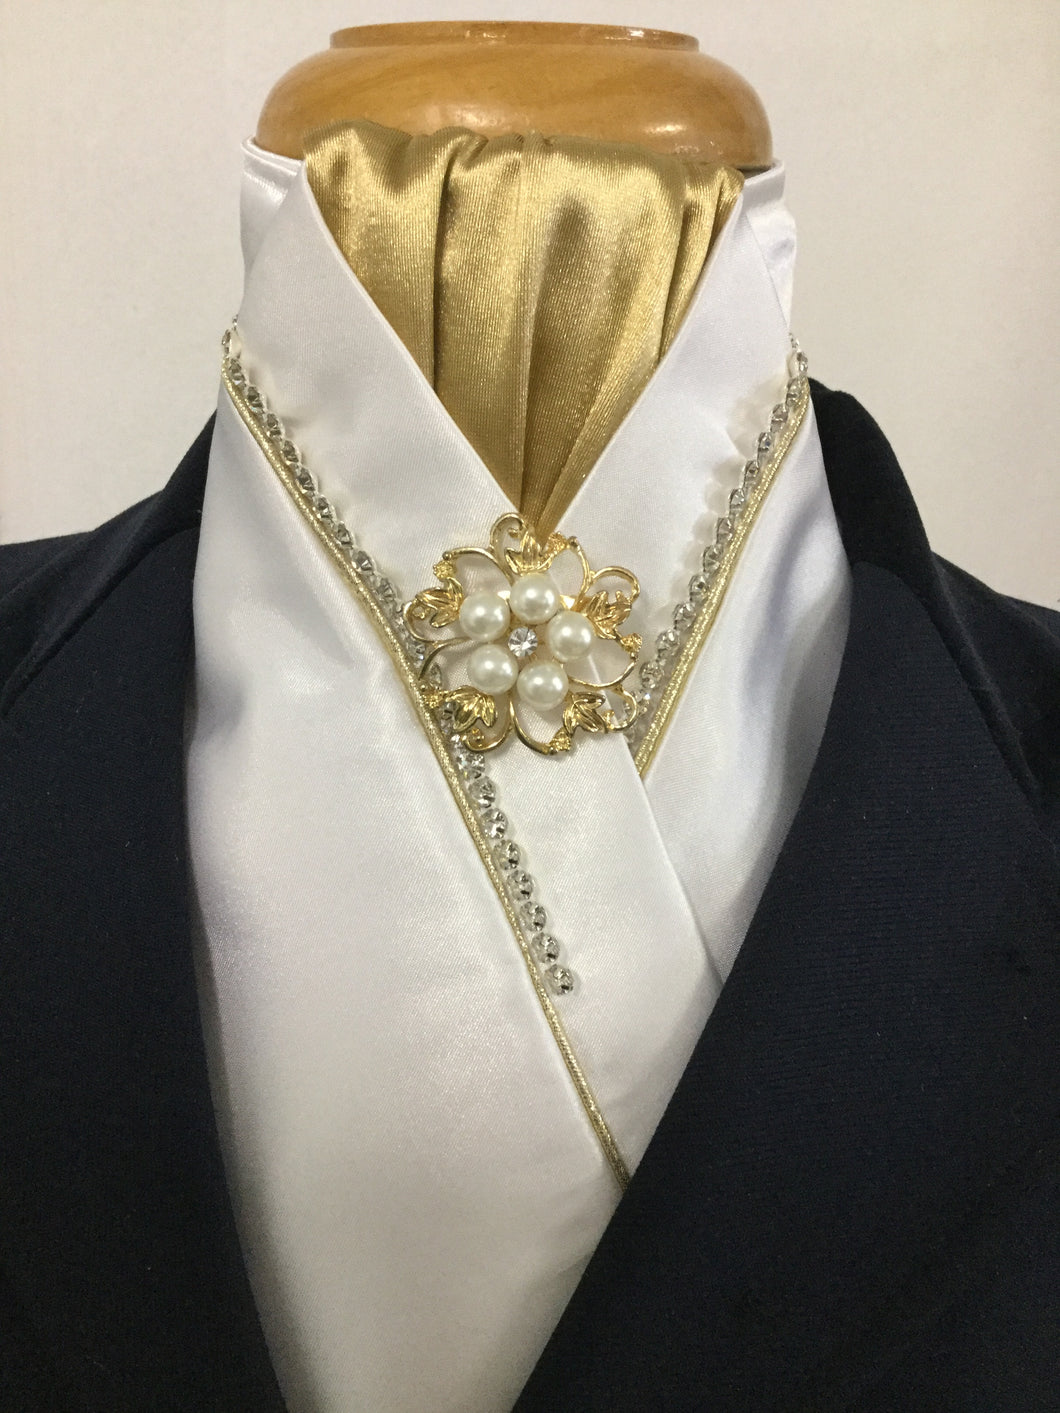 HHD Dressage Stock Tie White with Gold Crystals